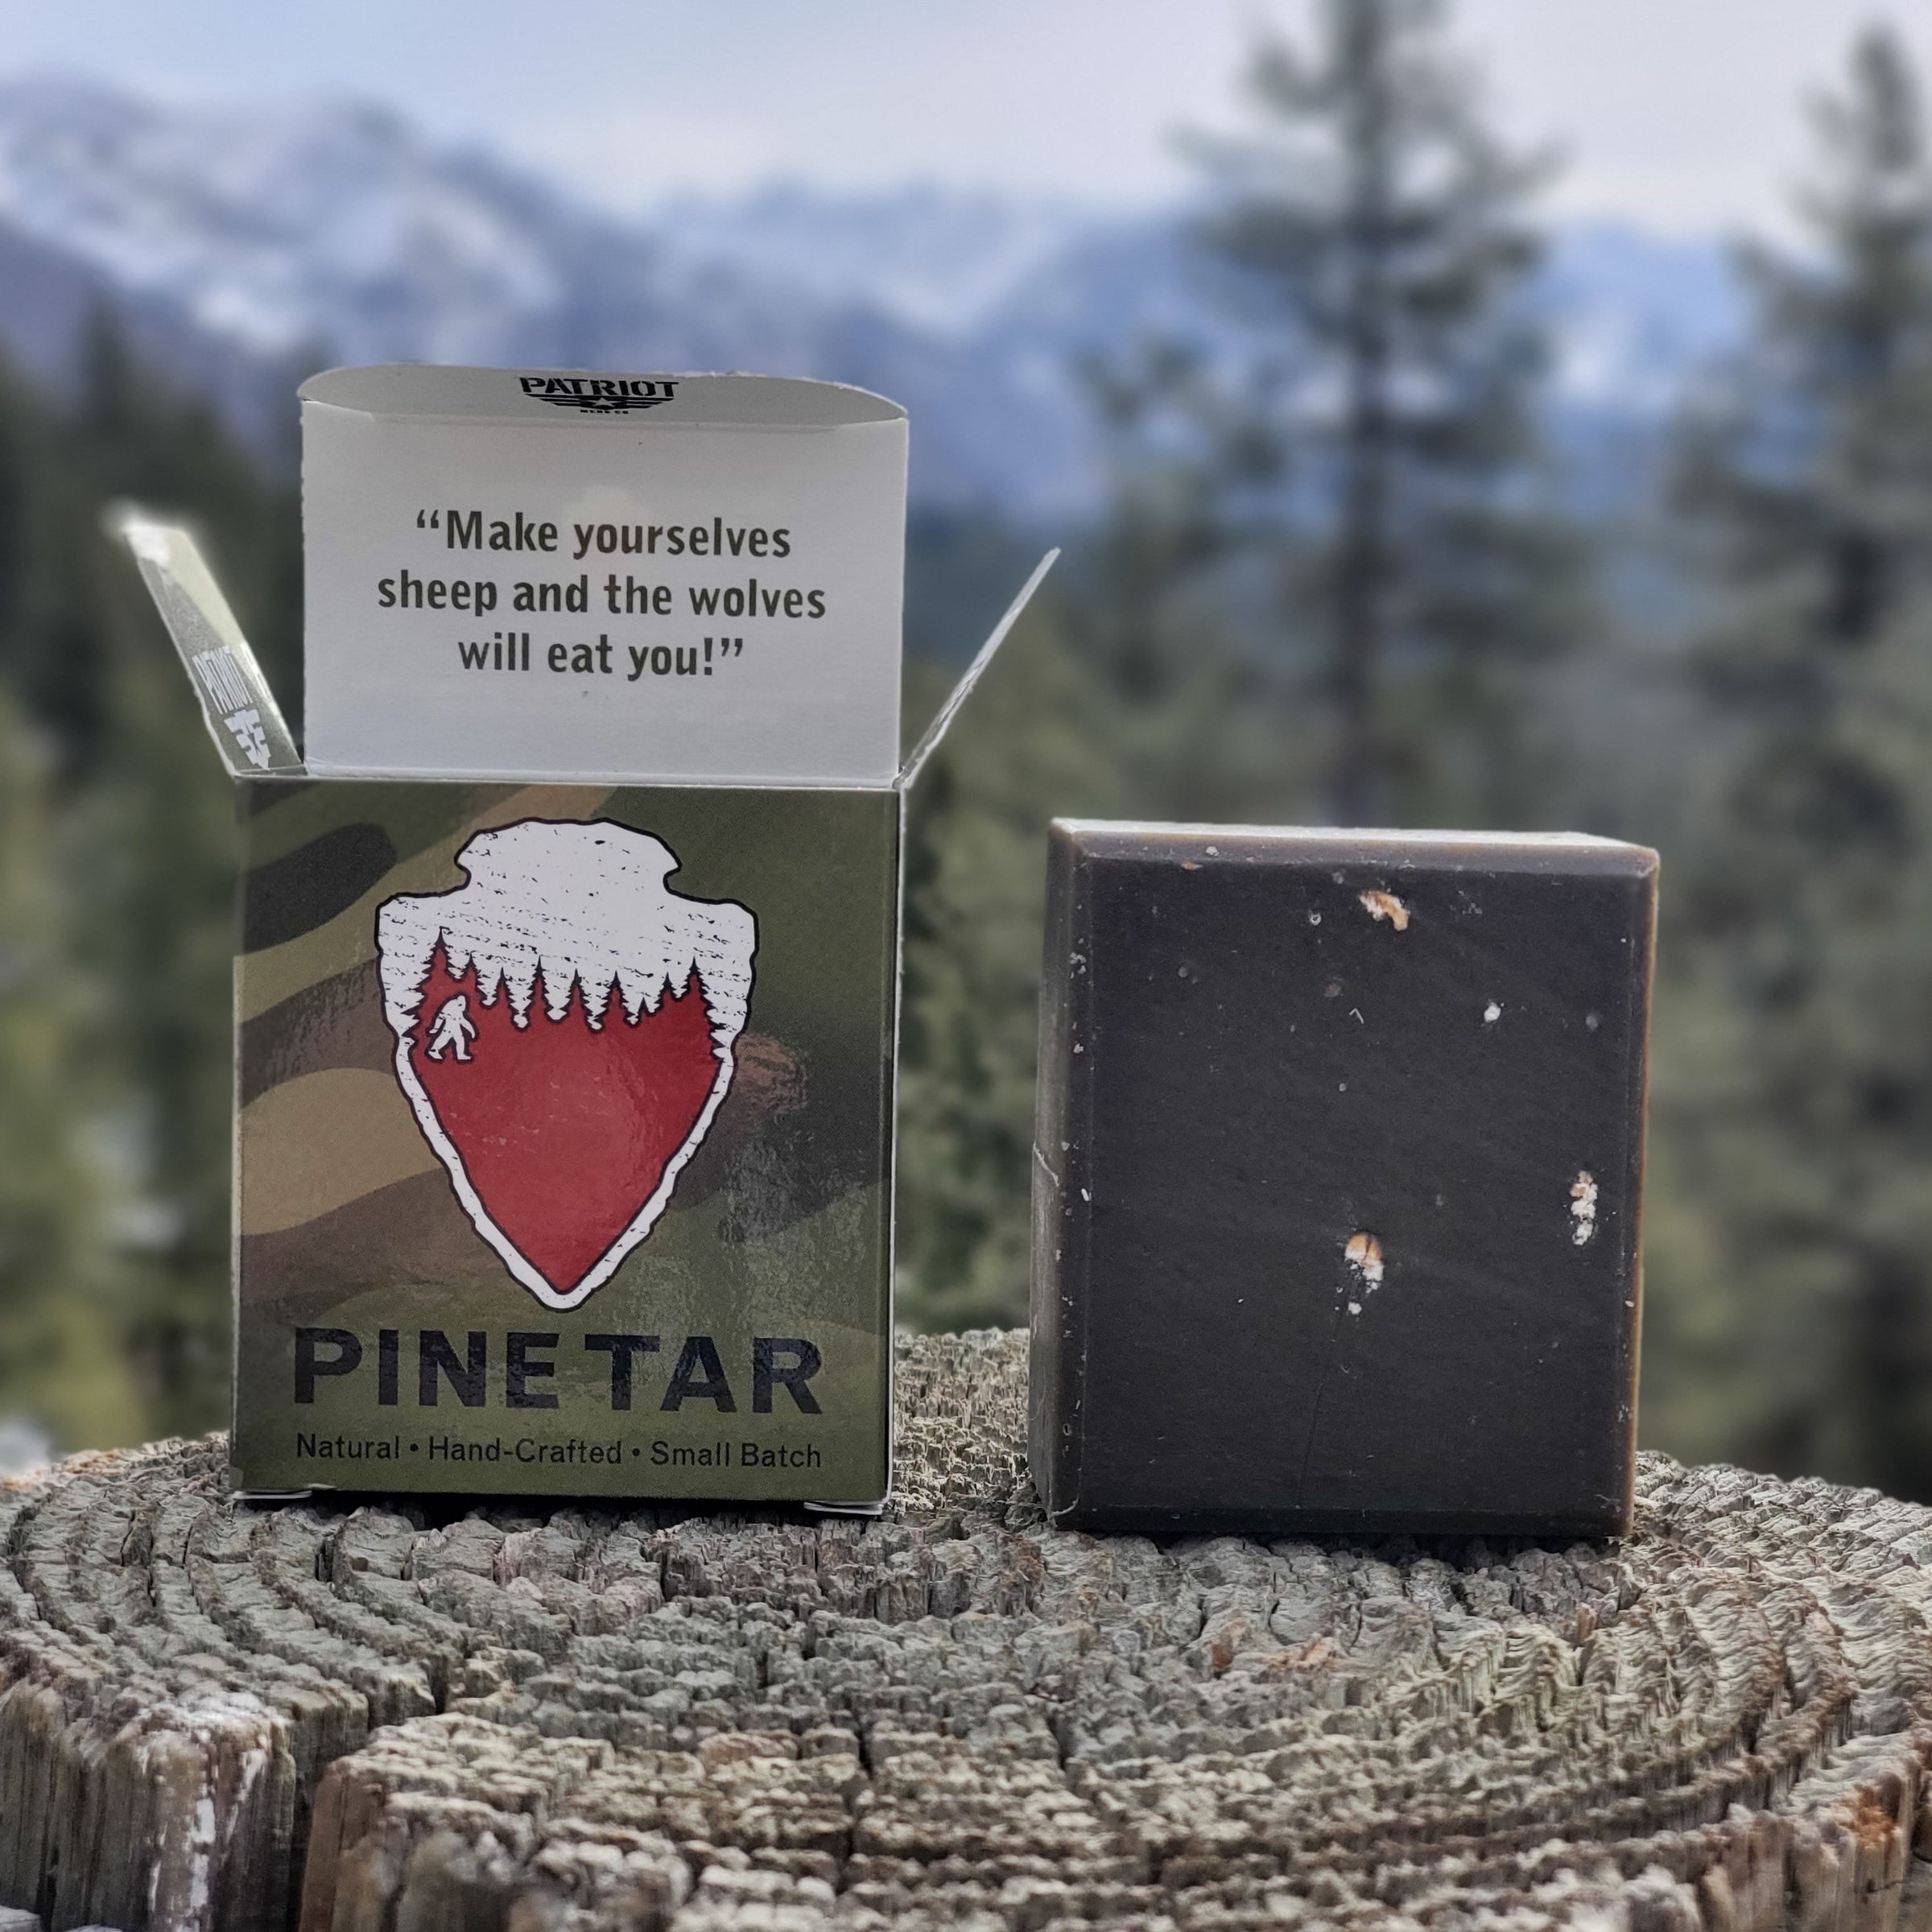 Dr. Squatch's Best-Selling Pine Tar Scent Is Now Available In A